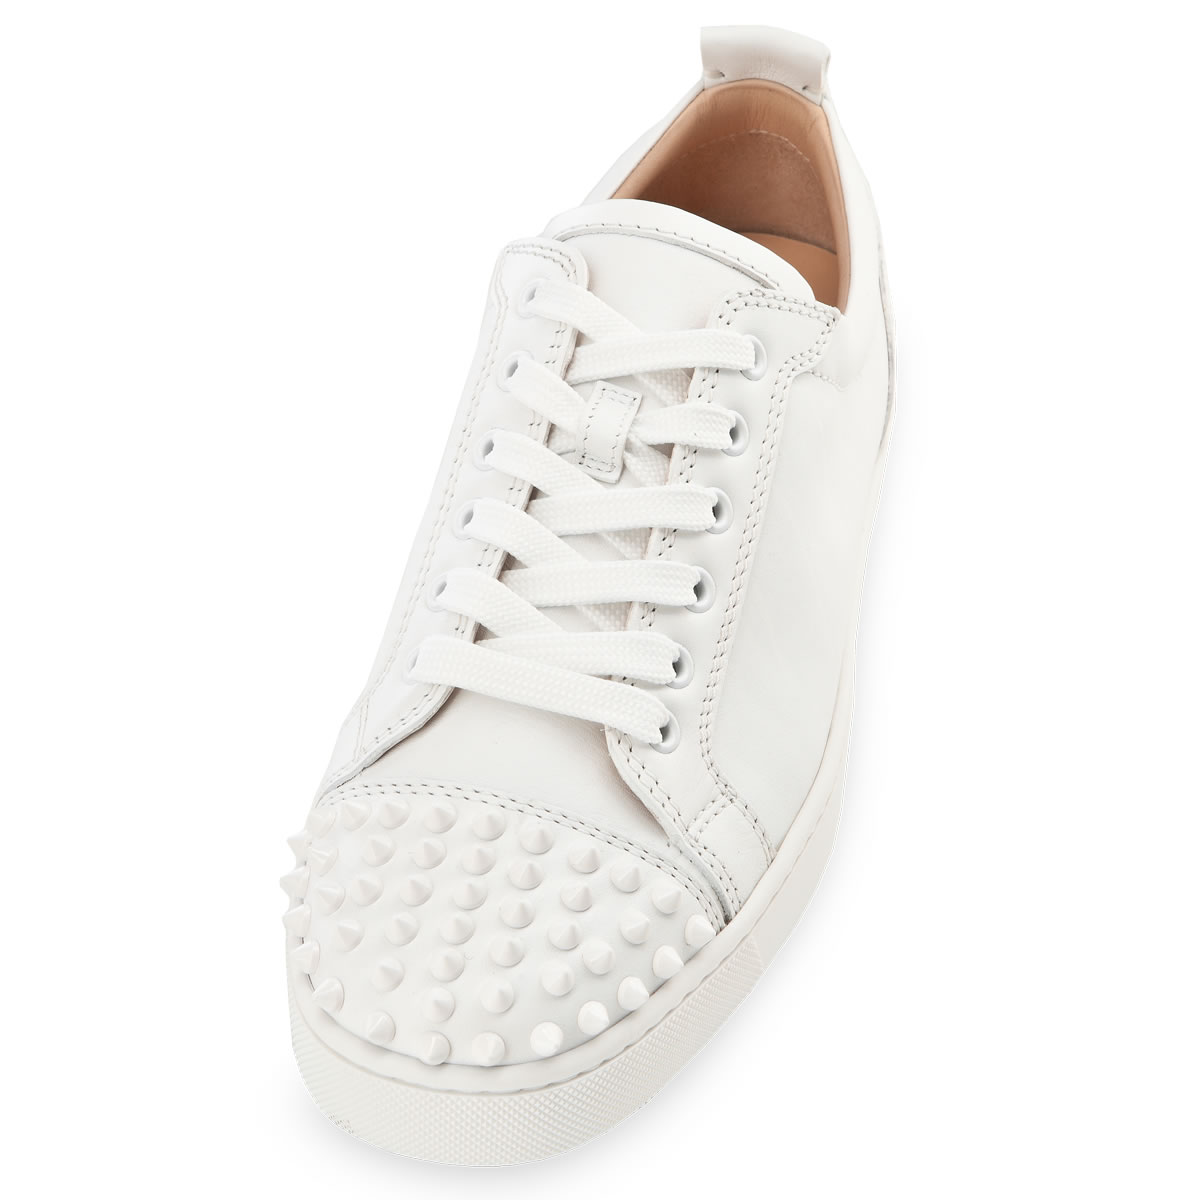 Louis Junior Spikes - Sneakers - Calf leather and spikes - White